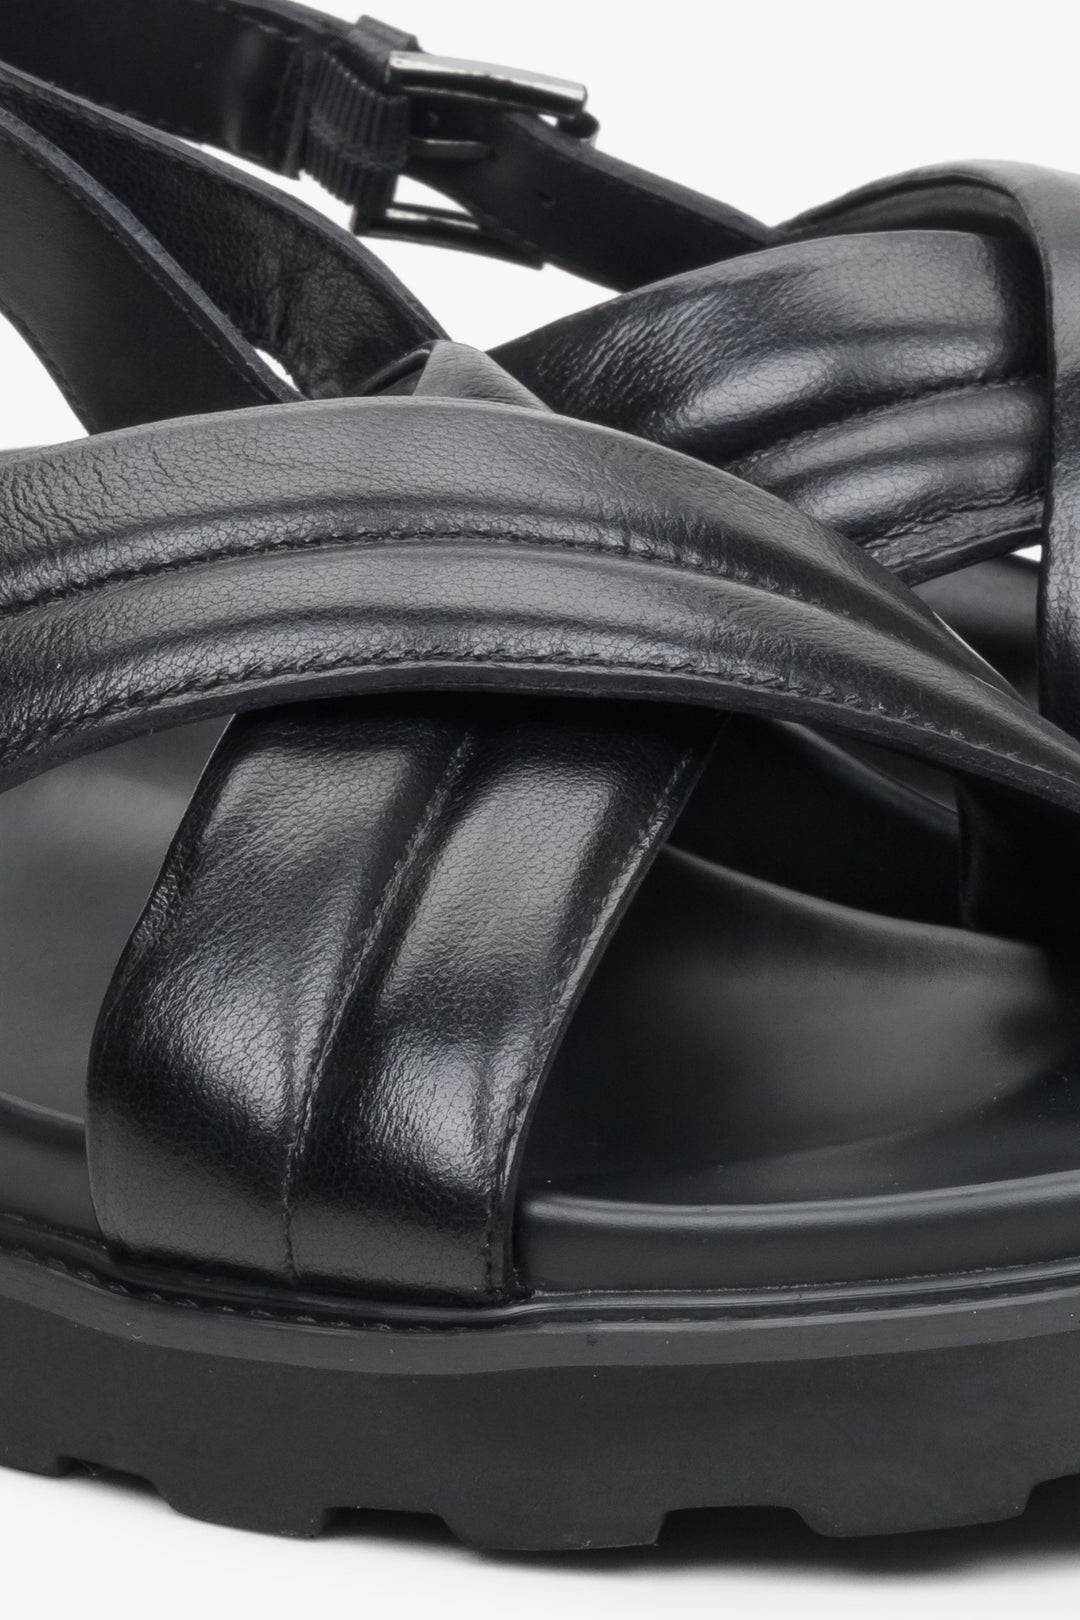 Men's black sandals made of genuine leather by Estro - close-up on the details.